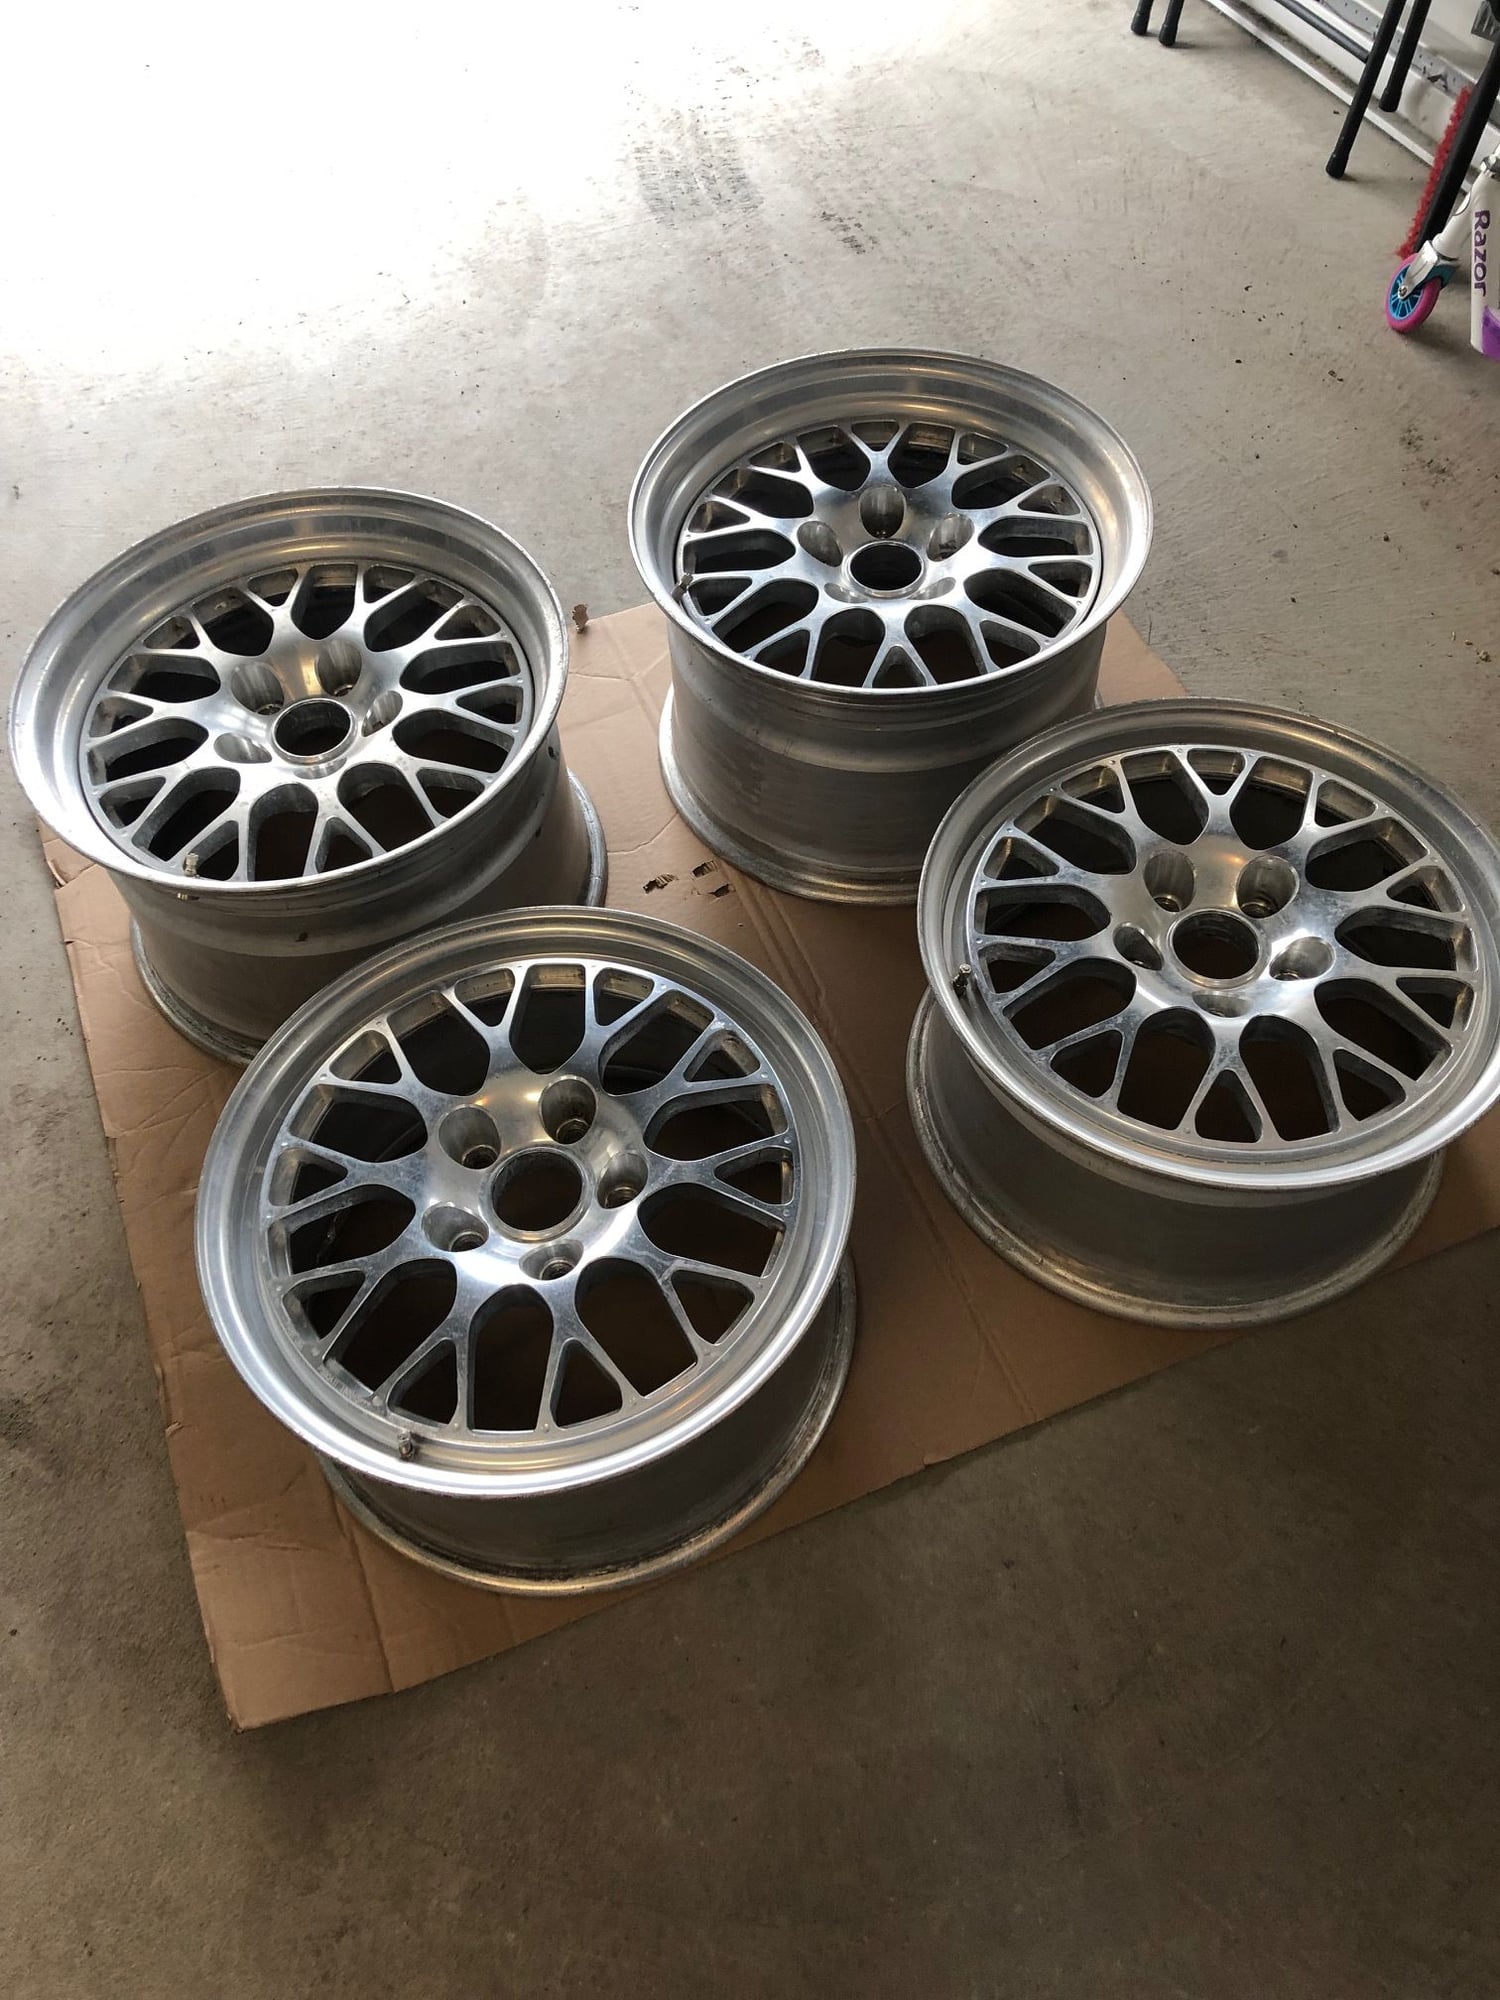 Wheels and Tires/Axles - Selling a few sets of rims 997 and 993 - Used - Champlain, NY 12919, United States